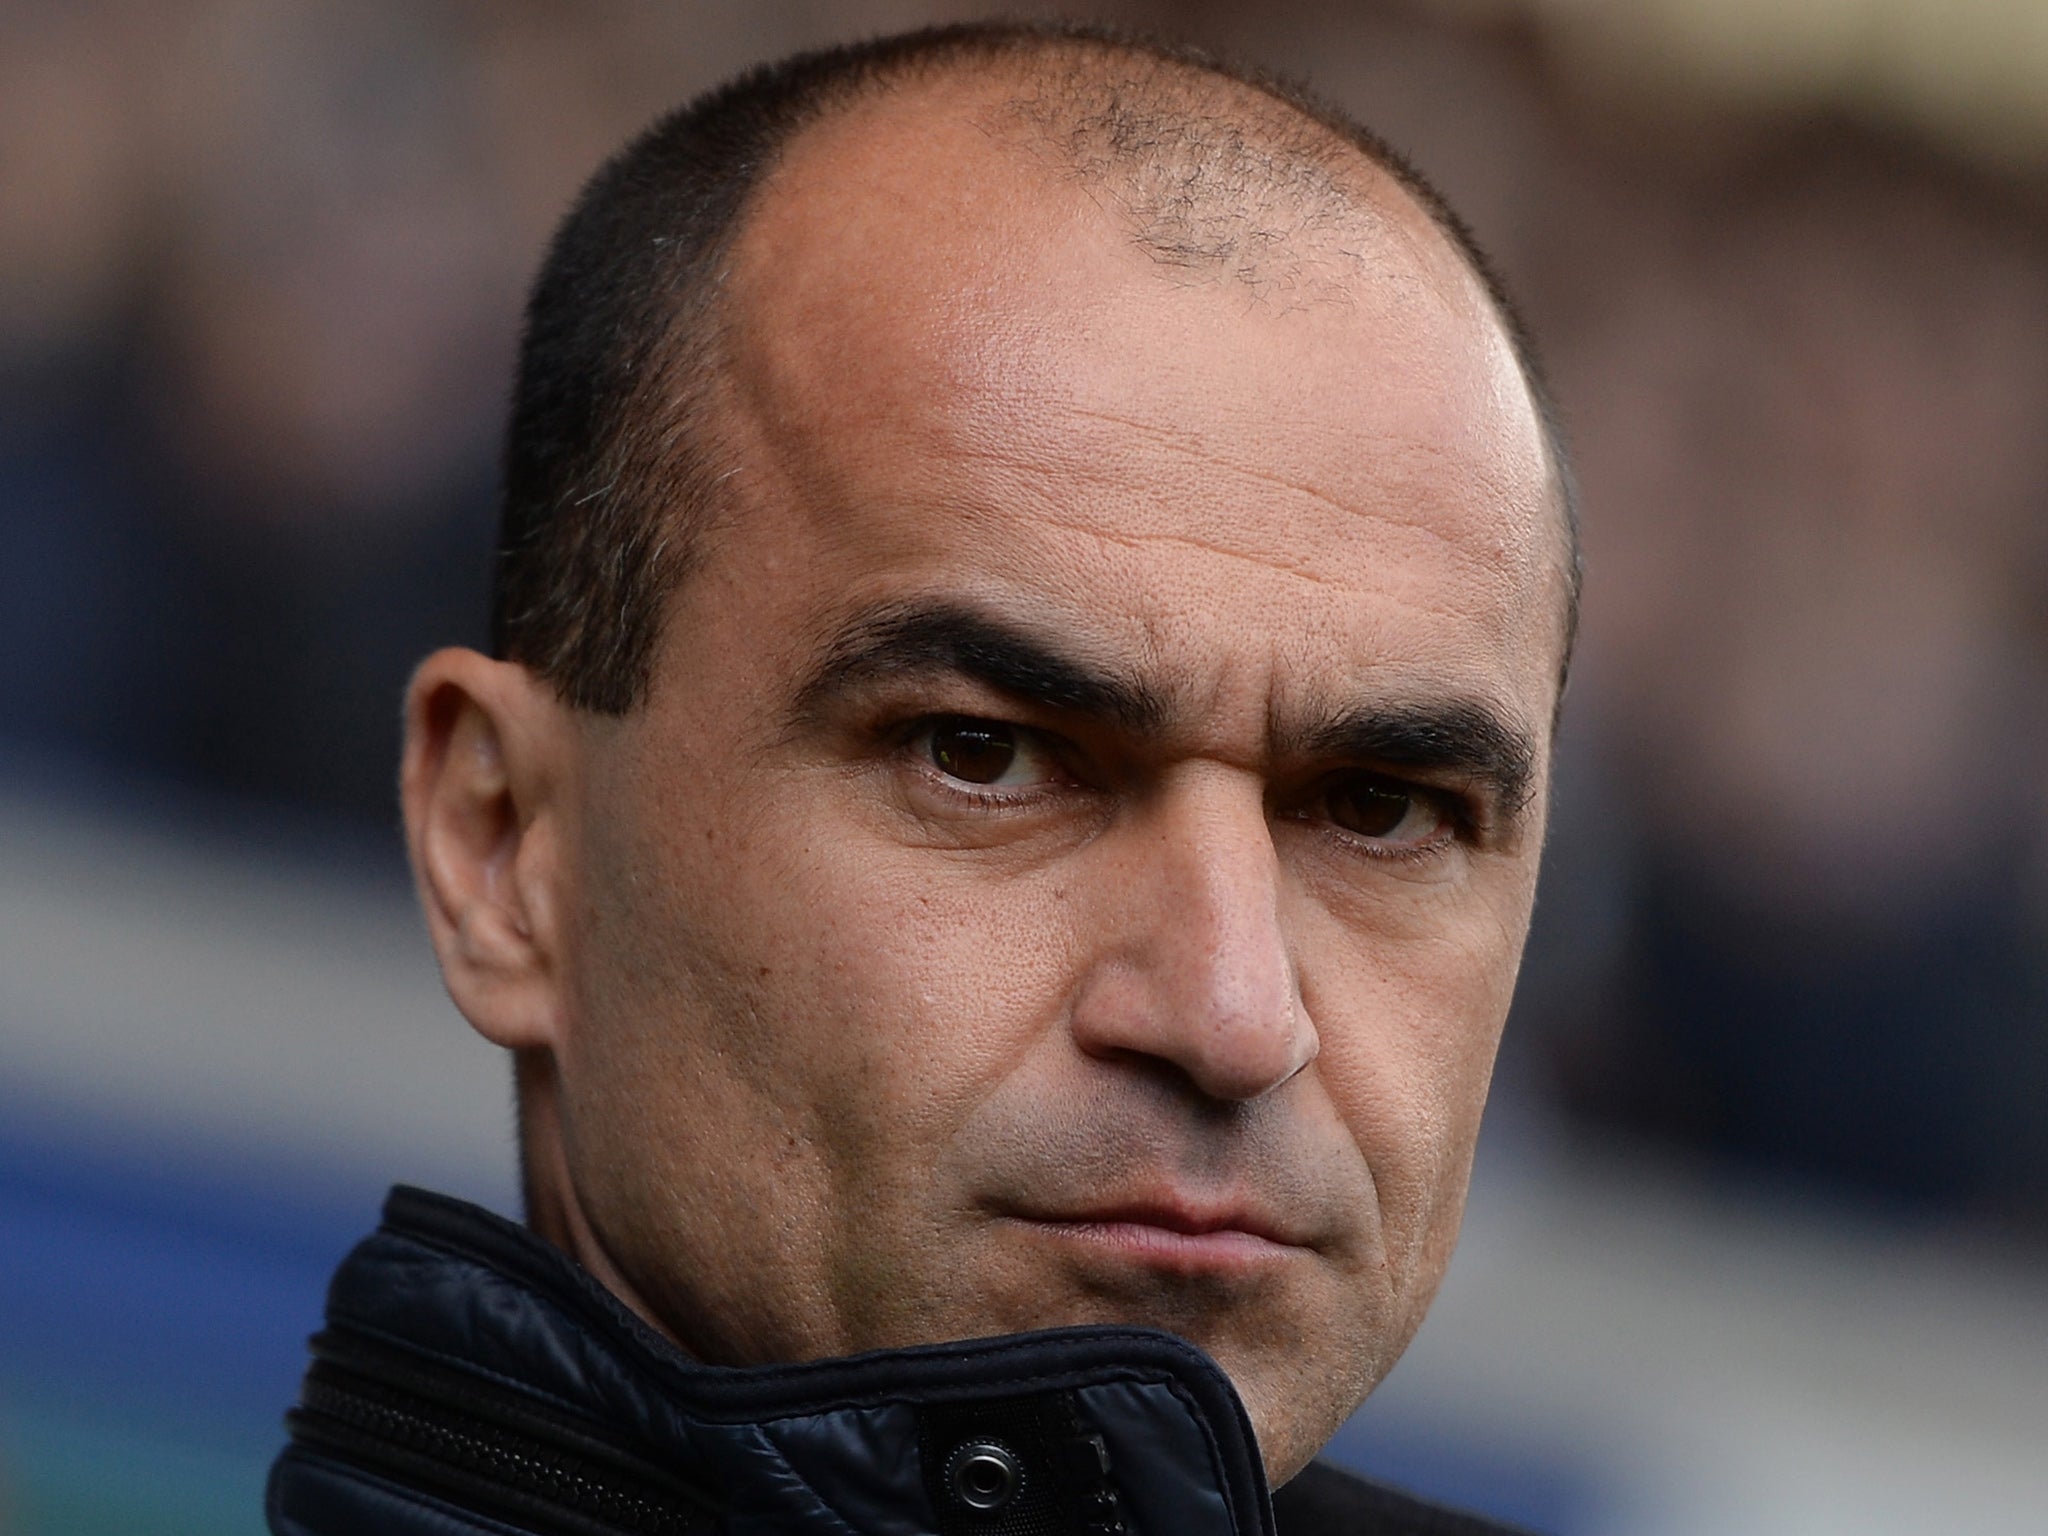 Martinez understands why supporters have been critical in recent weeks